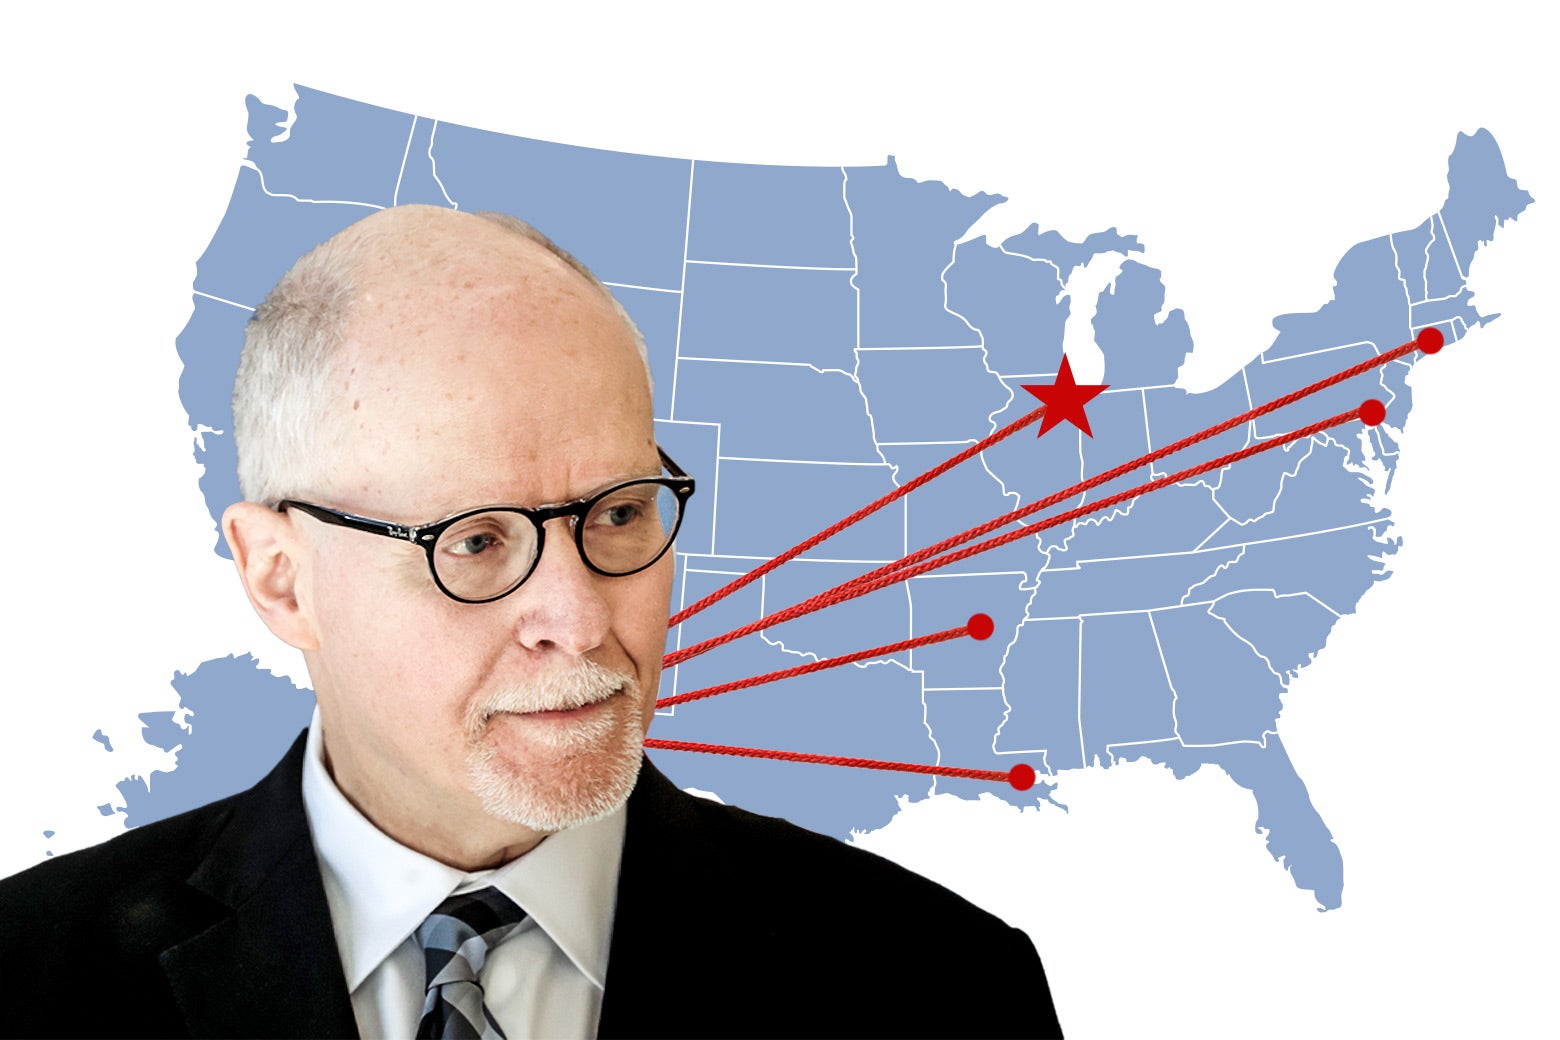 Paul Vallas looking down and to his left, superimposed over a map of the USA, with red string illustrated coming from him to the cities he's been: Bridgeport, Connecticut; Philadelphia; Little Rock; New Orleans; and Chicago, which is marked with a star.